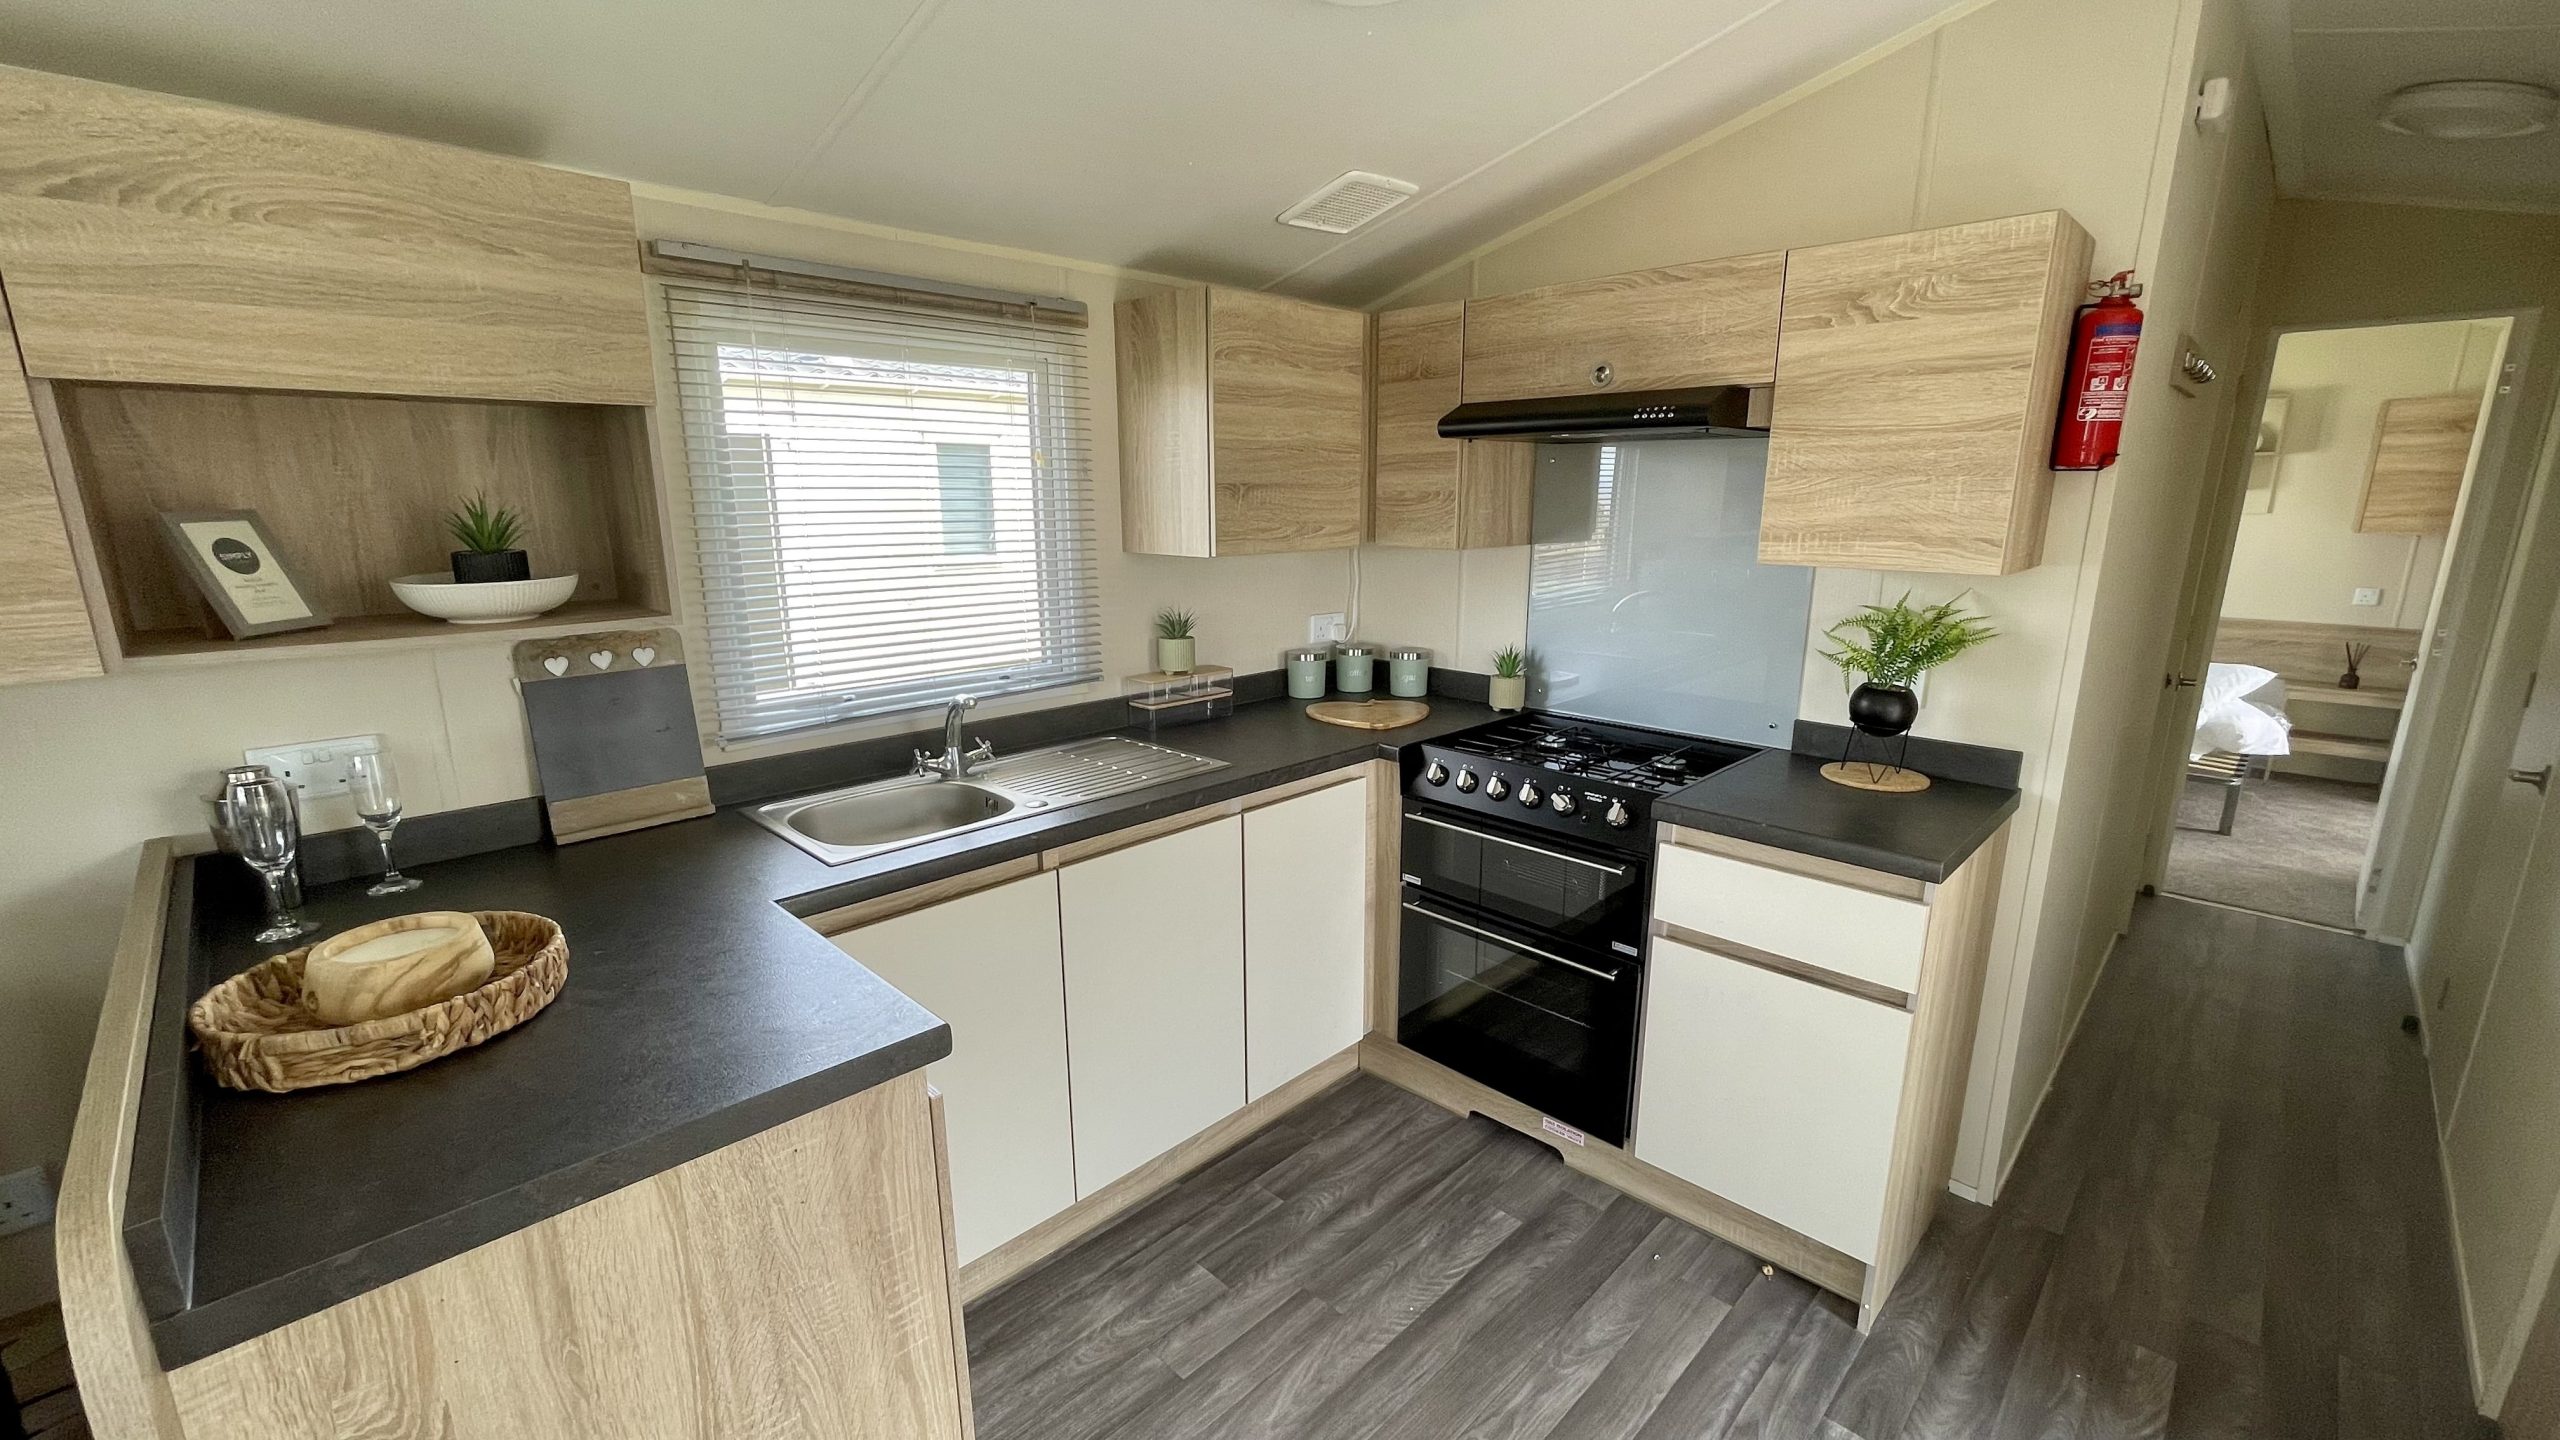 2016 Willerby Lymington for sale at St Audries Bay Holiday Club, Somerset